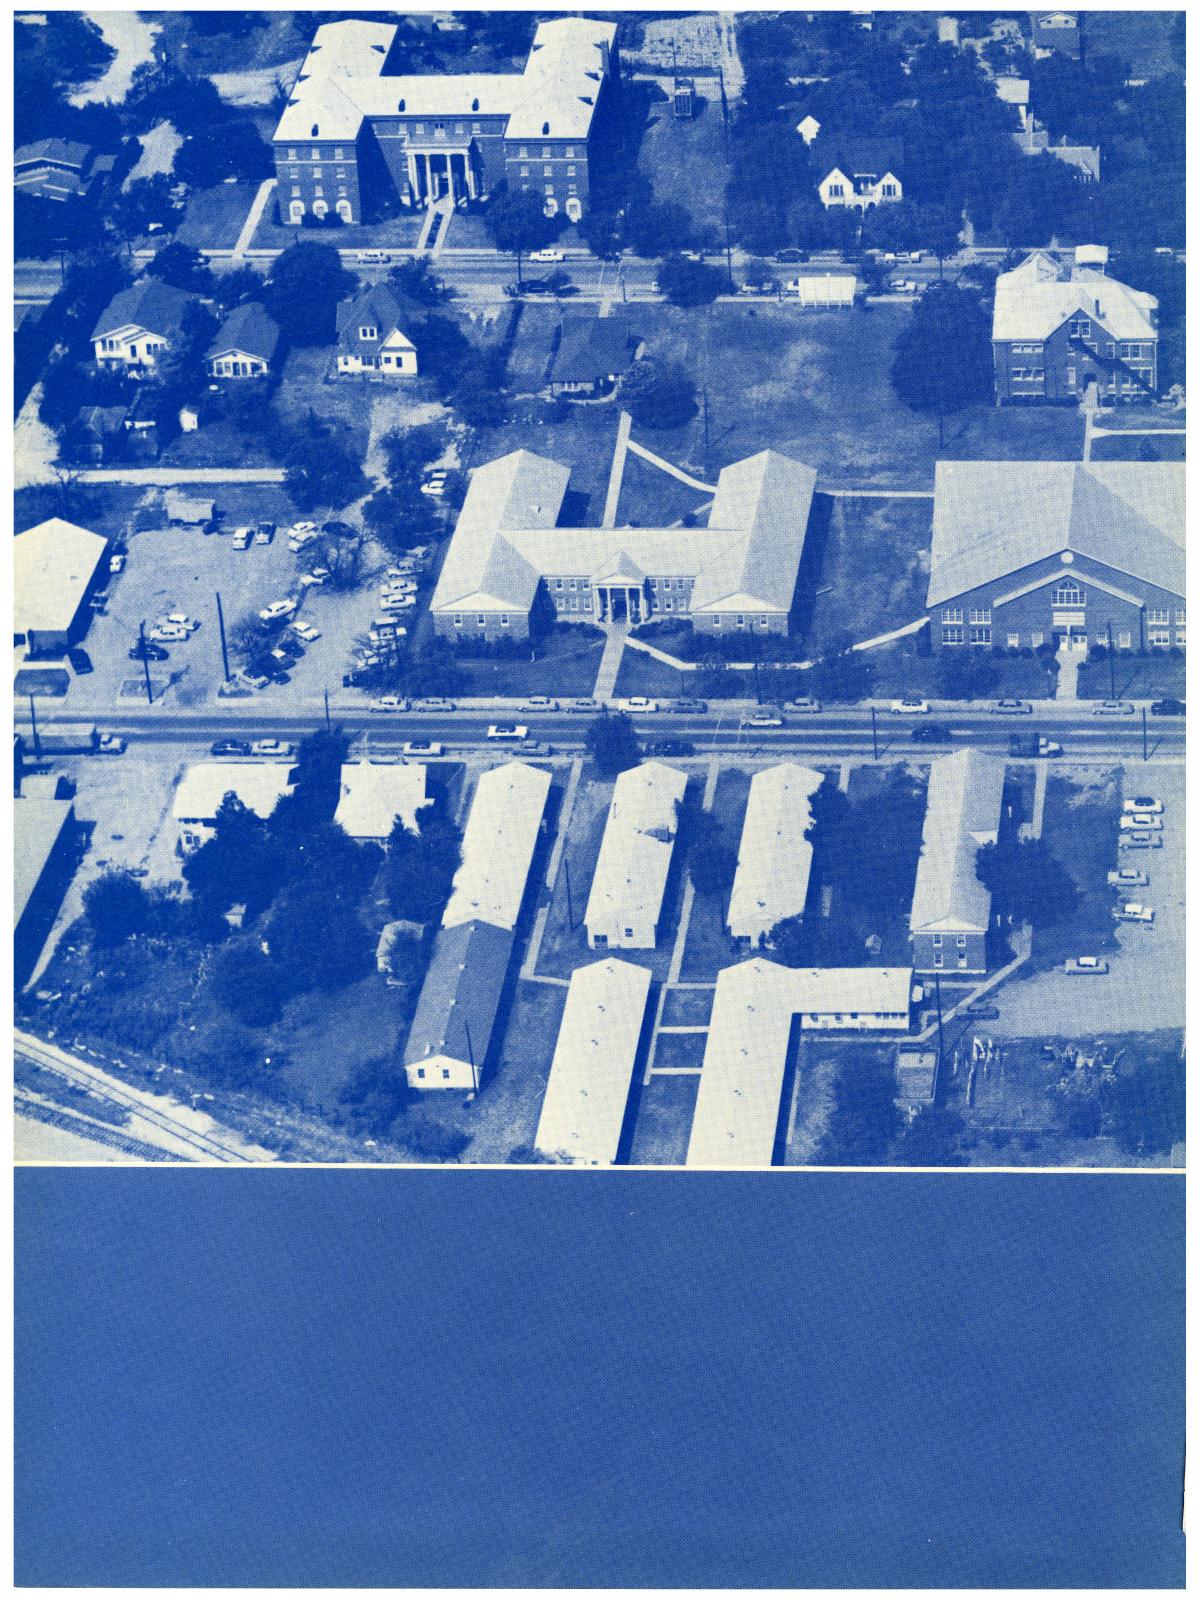 The Lasso, Yearbook of Howard Payne College, 1961
                                                
                                                    Front Inside
                                                